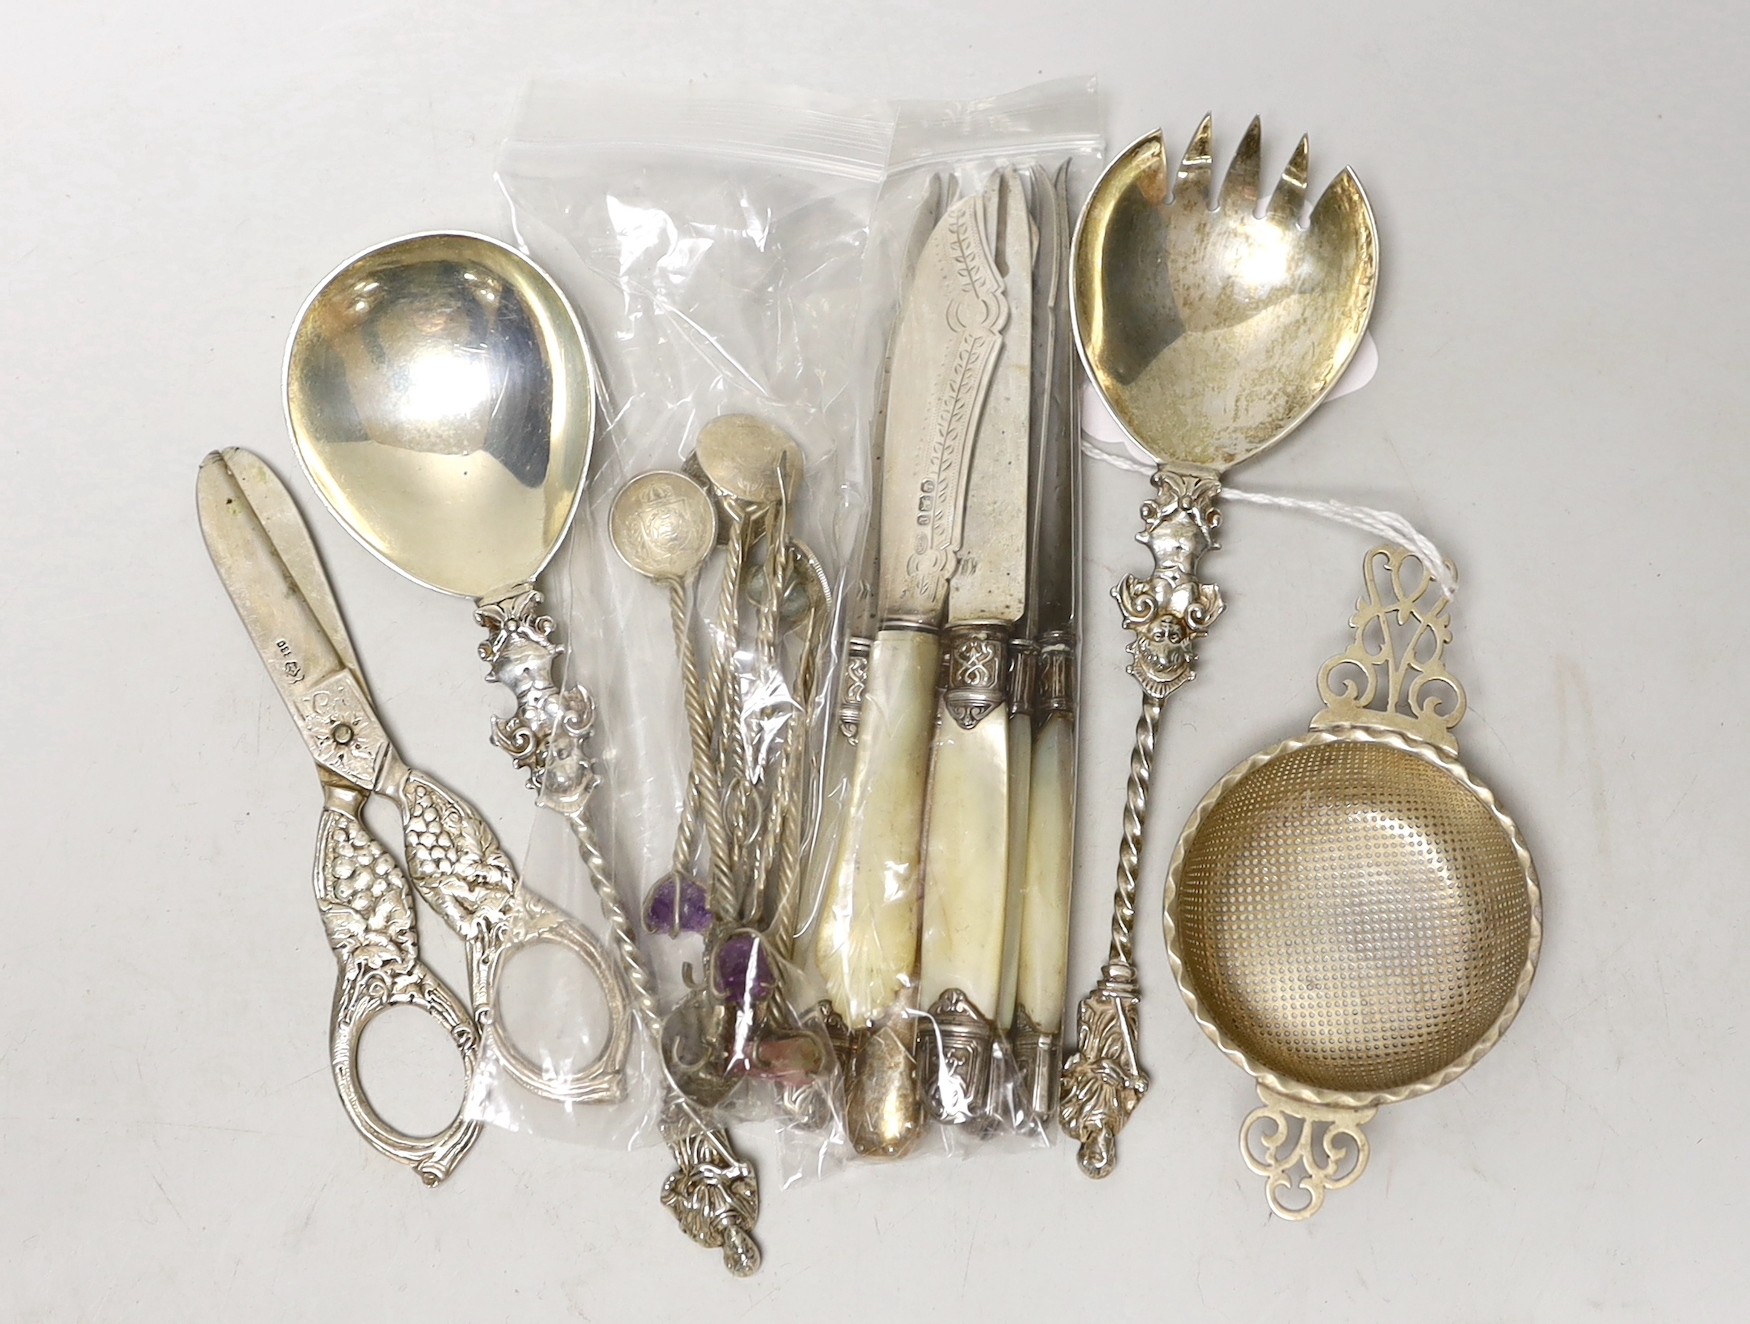 Small silver including a pair of late Victorian servers, by William Hutton & Sons, 830 standard white metal grape shears, tea strainer, fruit knives and novelty coin spoons and forks.                                     